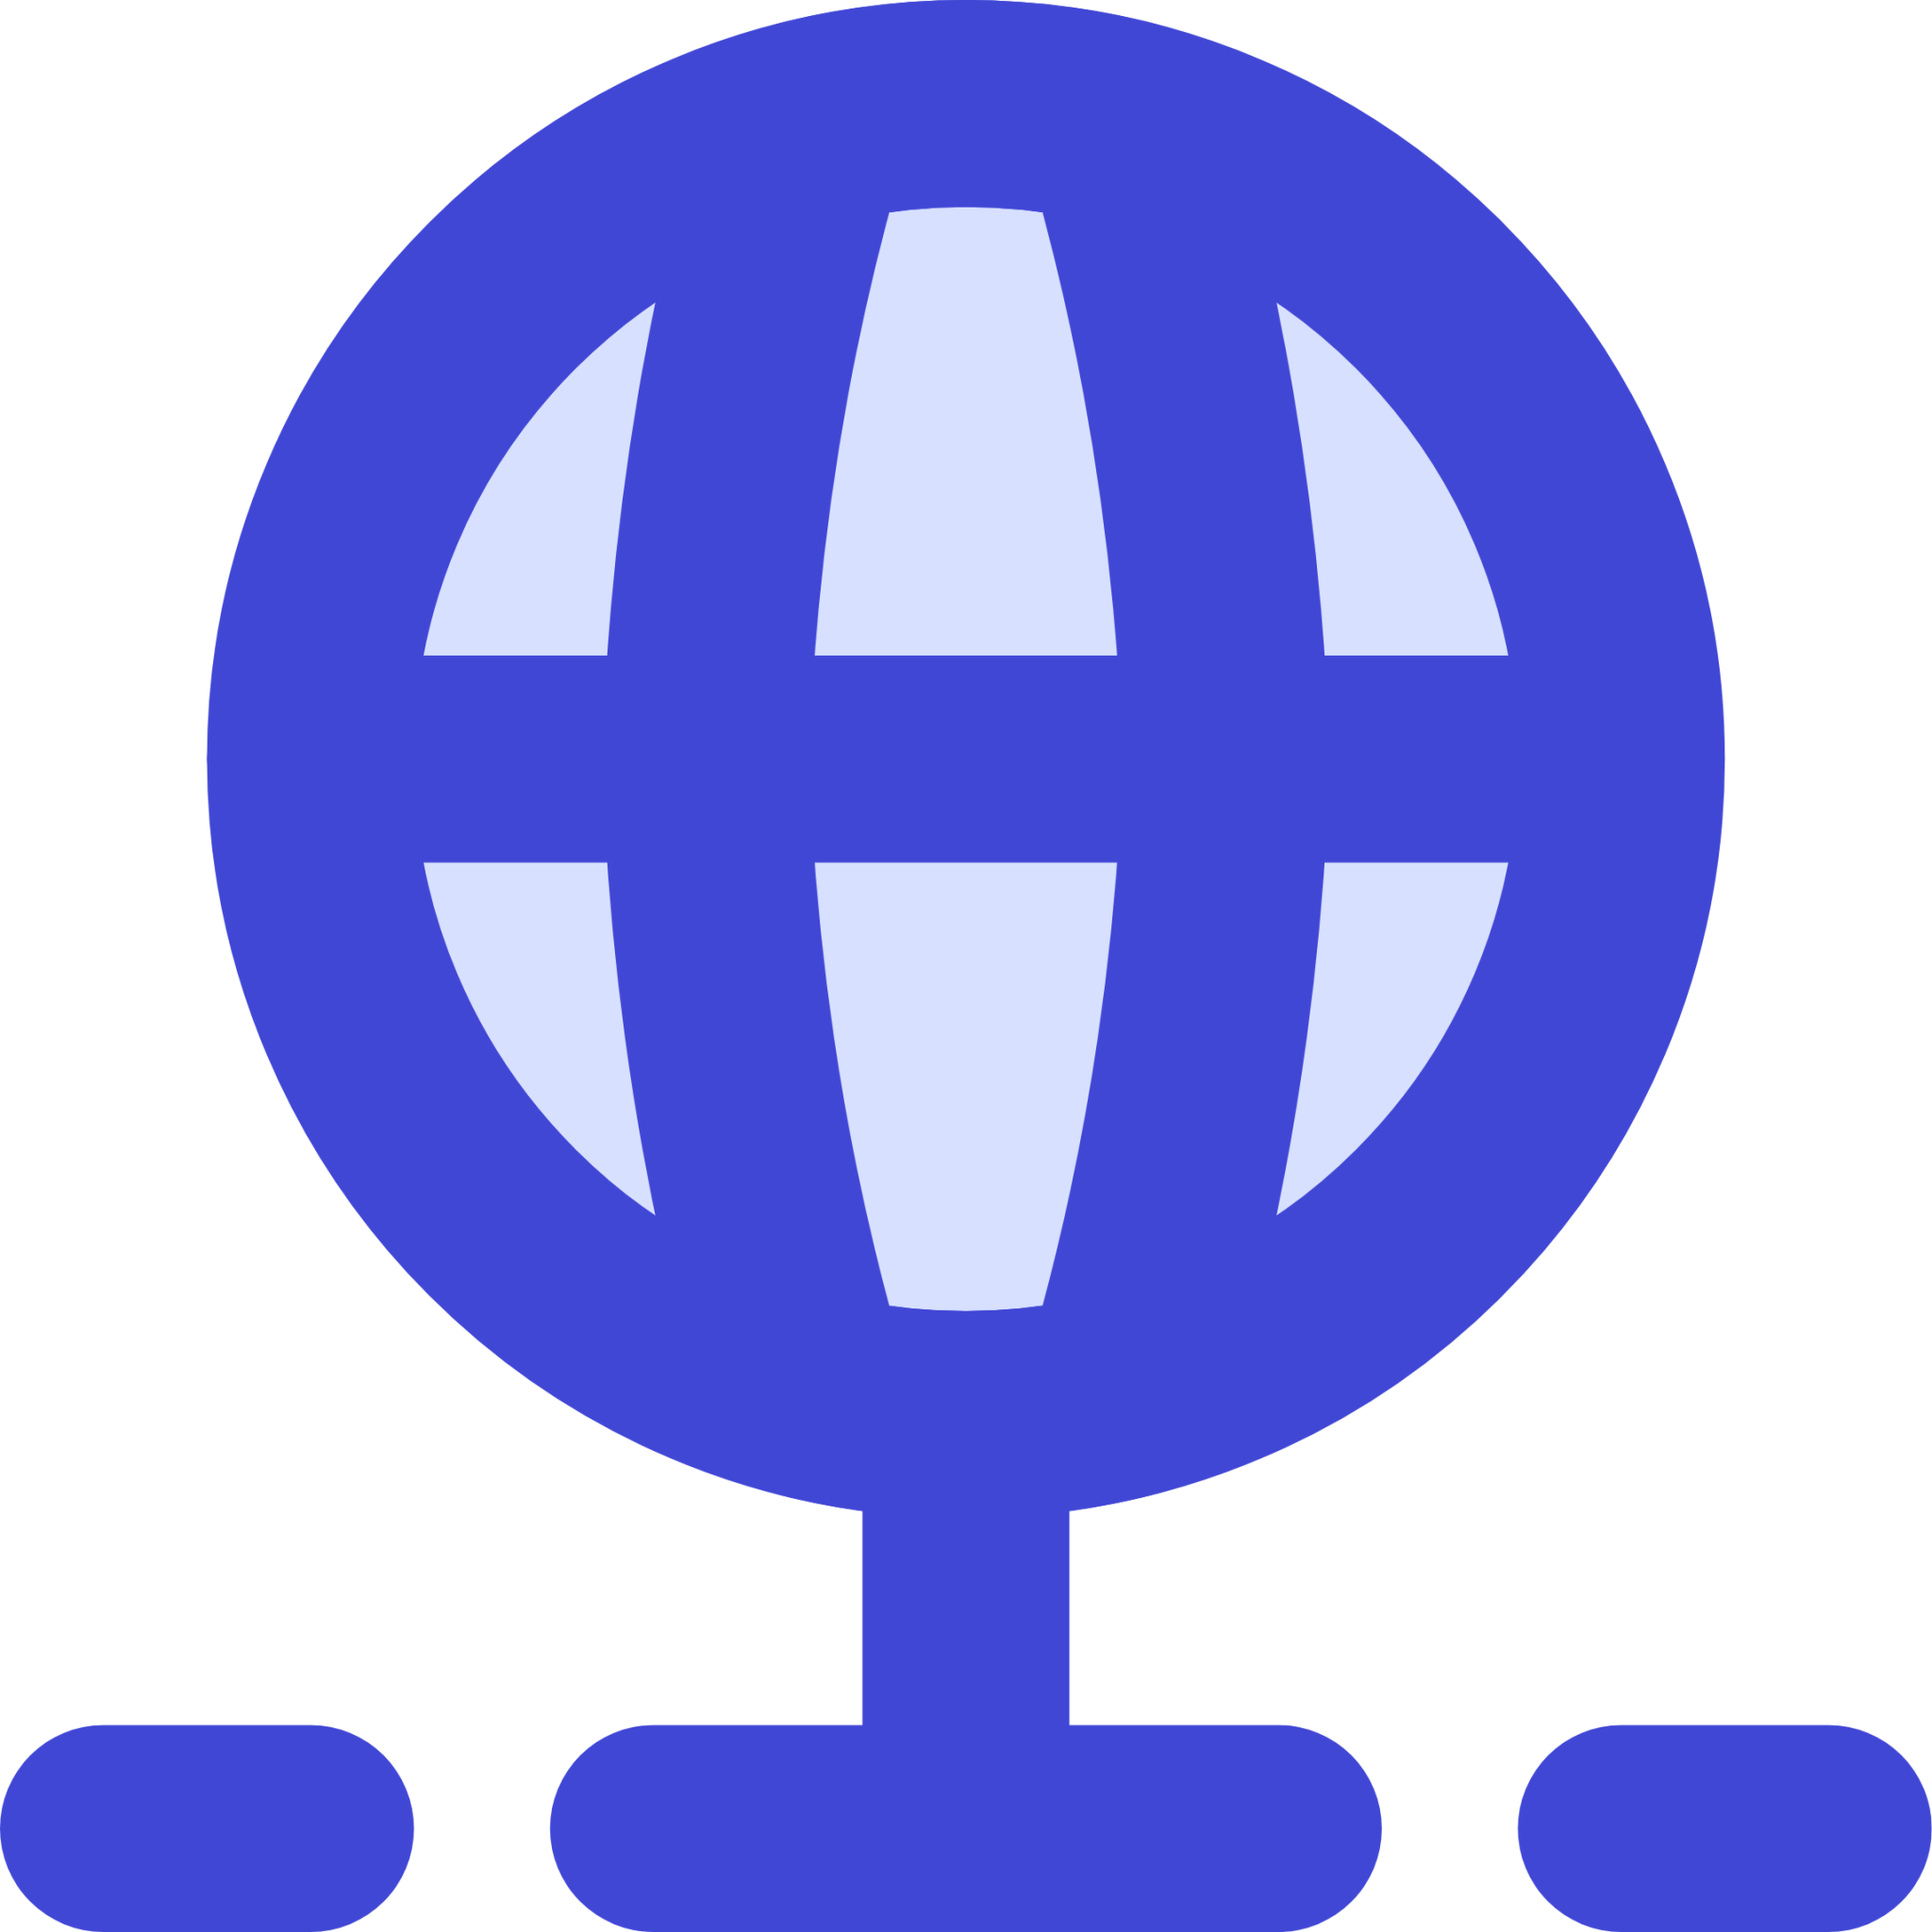 computer connection network network server internet ethernet icon